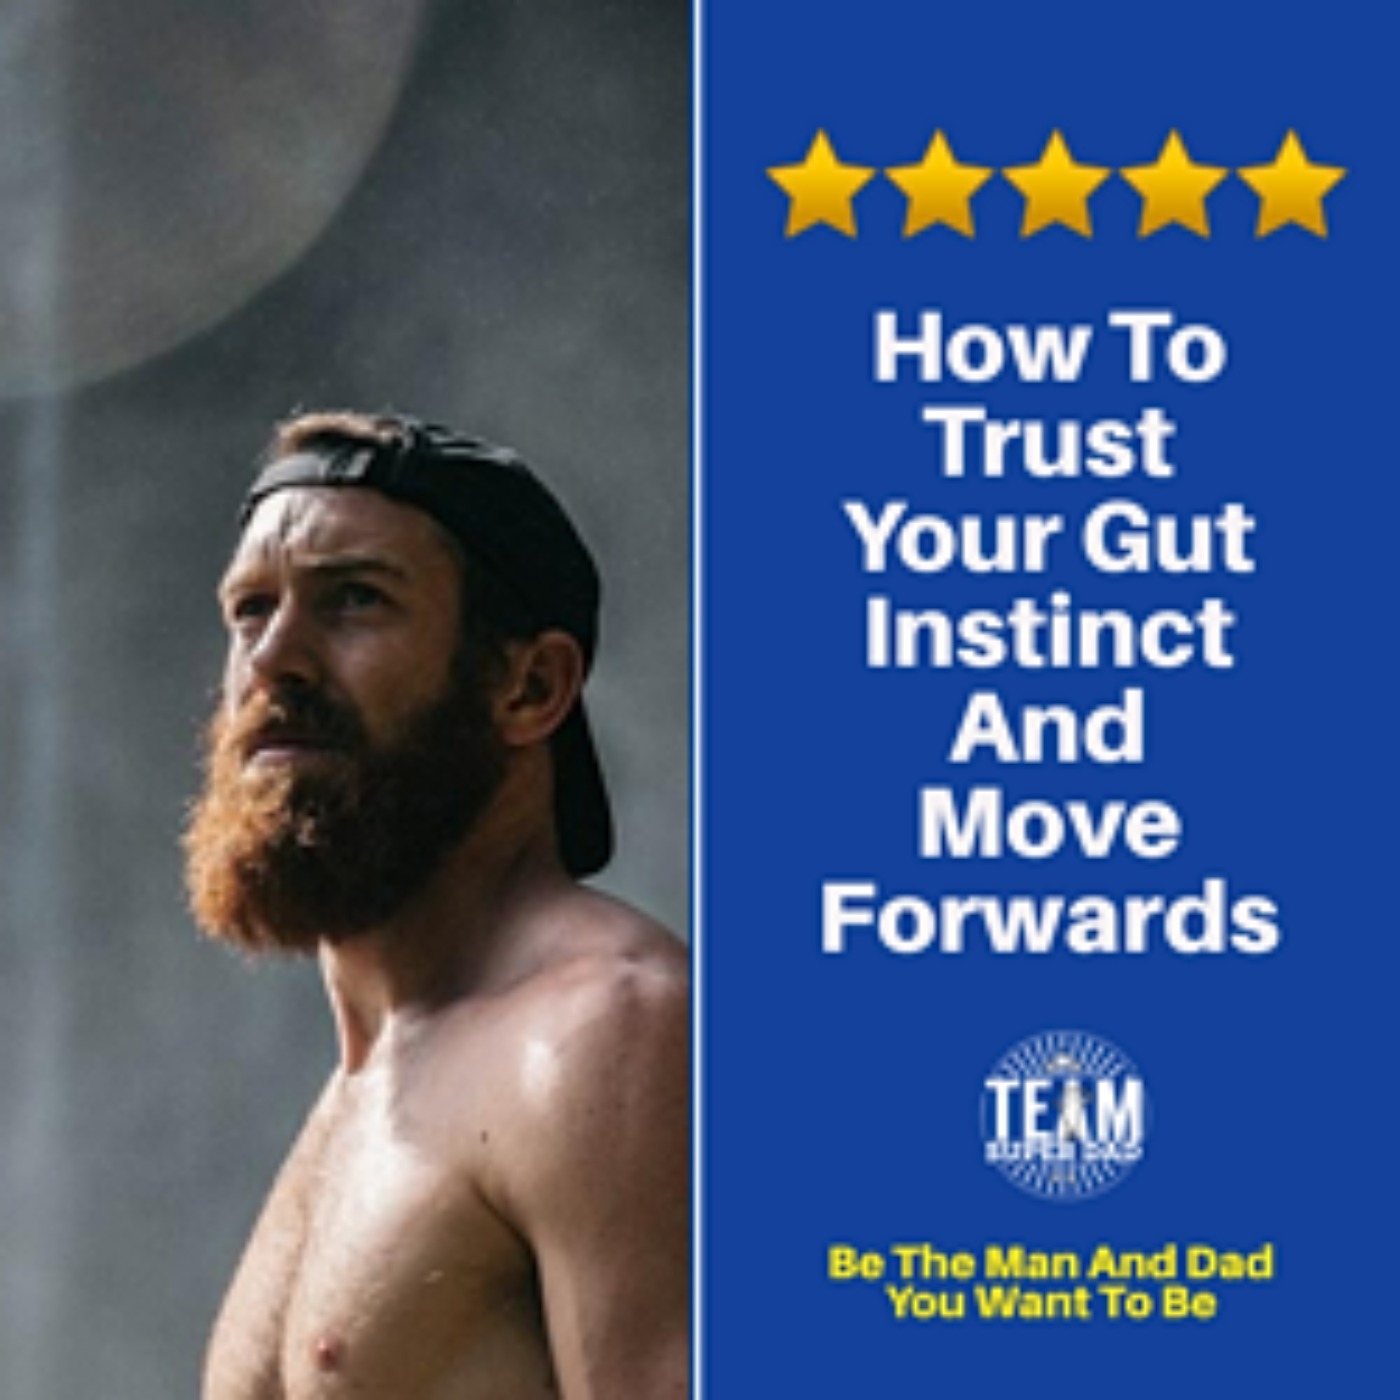 How To Trust Your Gut Instinct And Keep Moving Forward